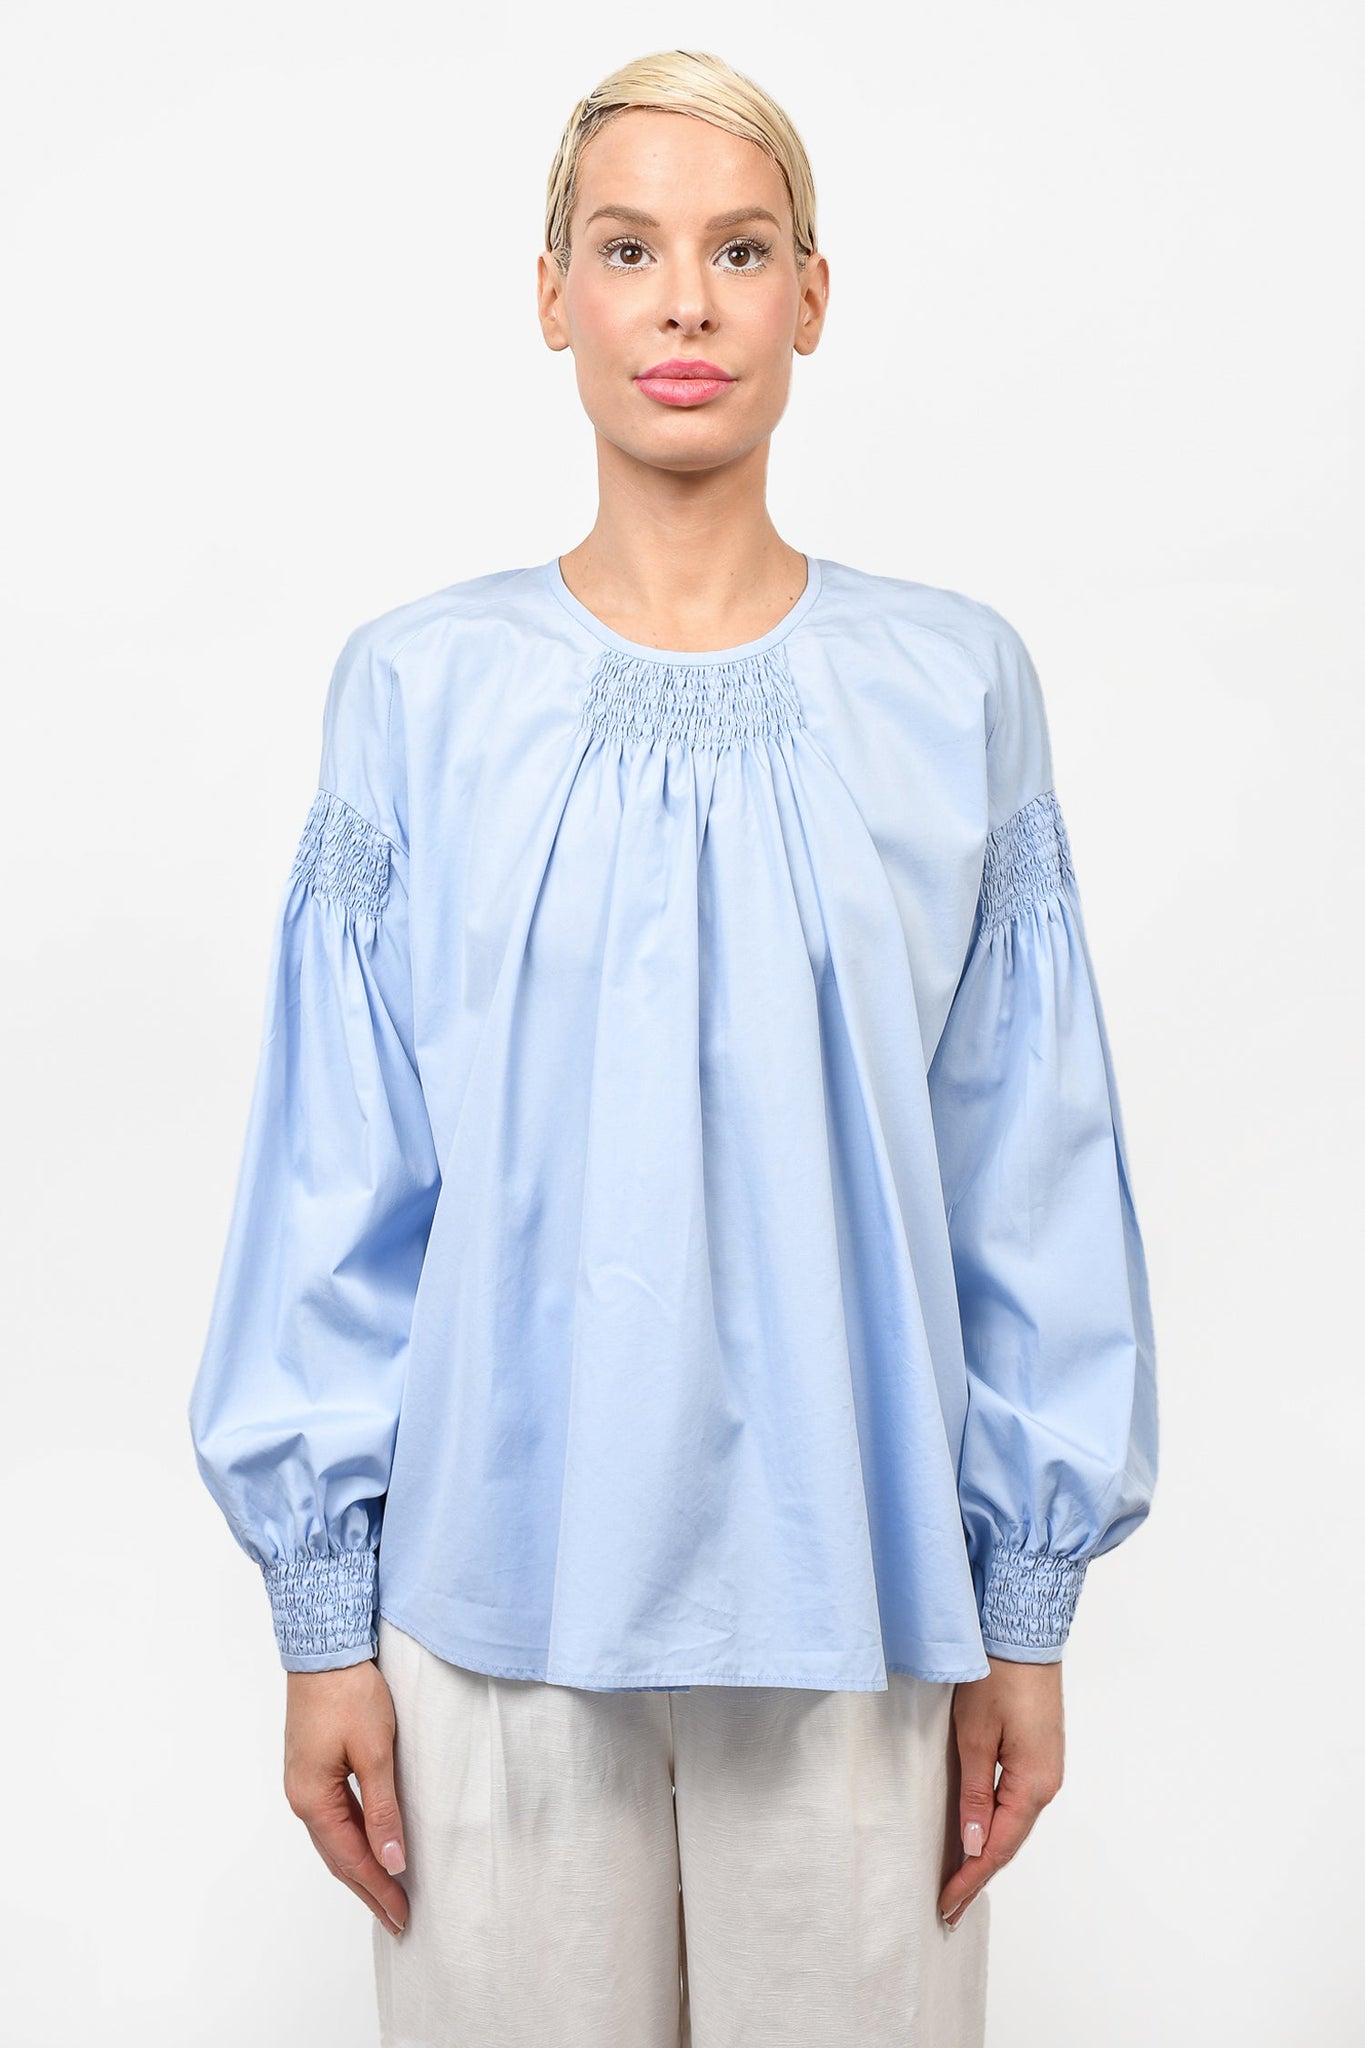 Dries Van Noten Blue Ruched Detailed Blouse size 38